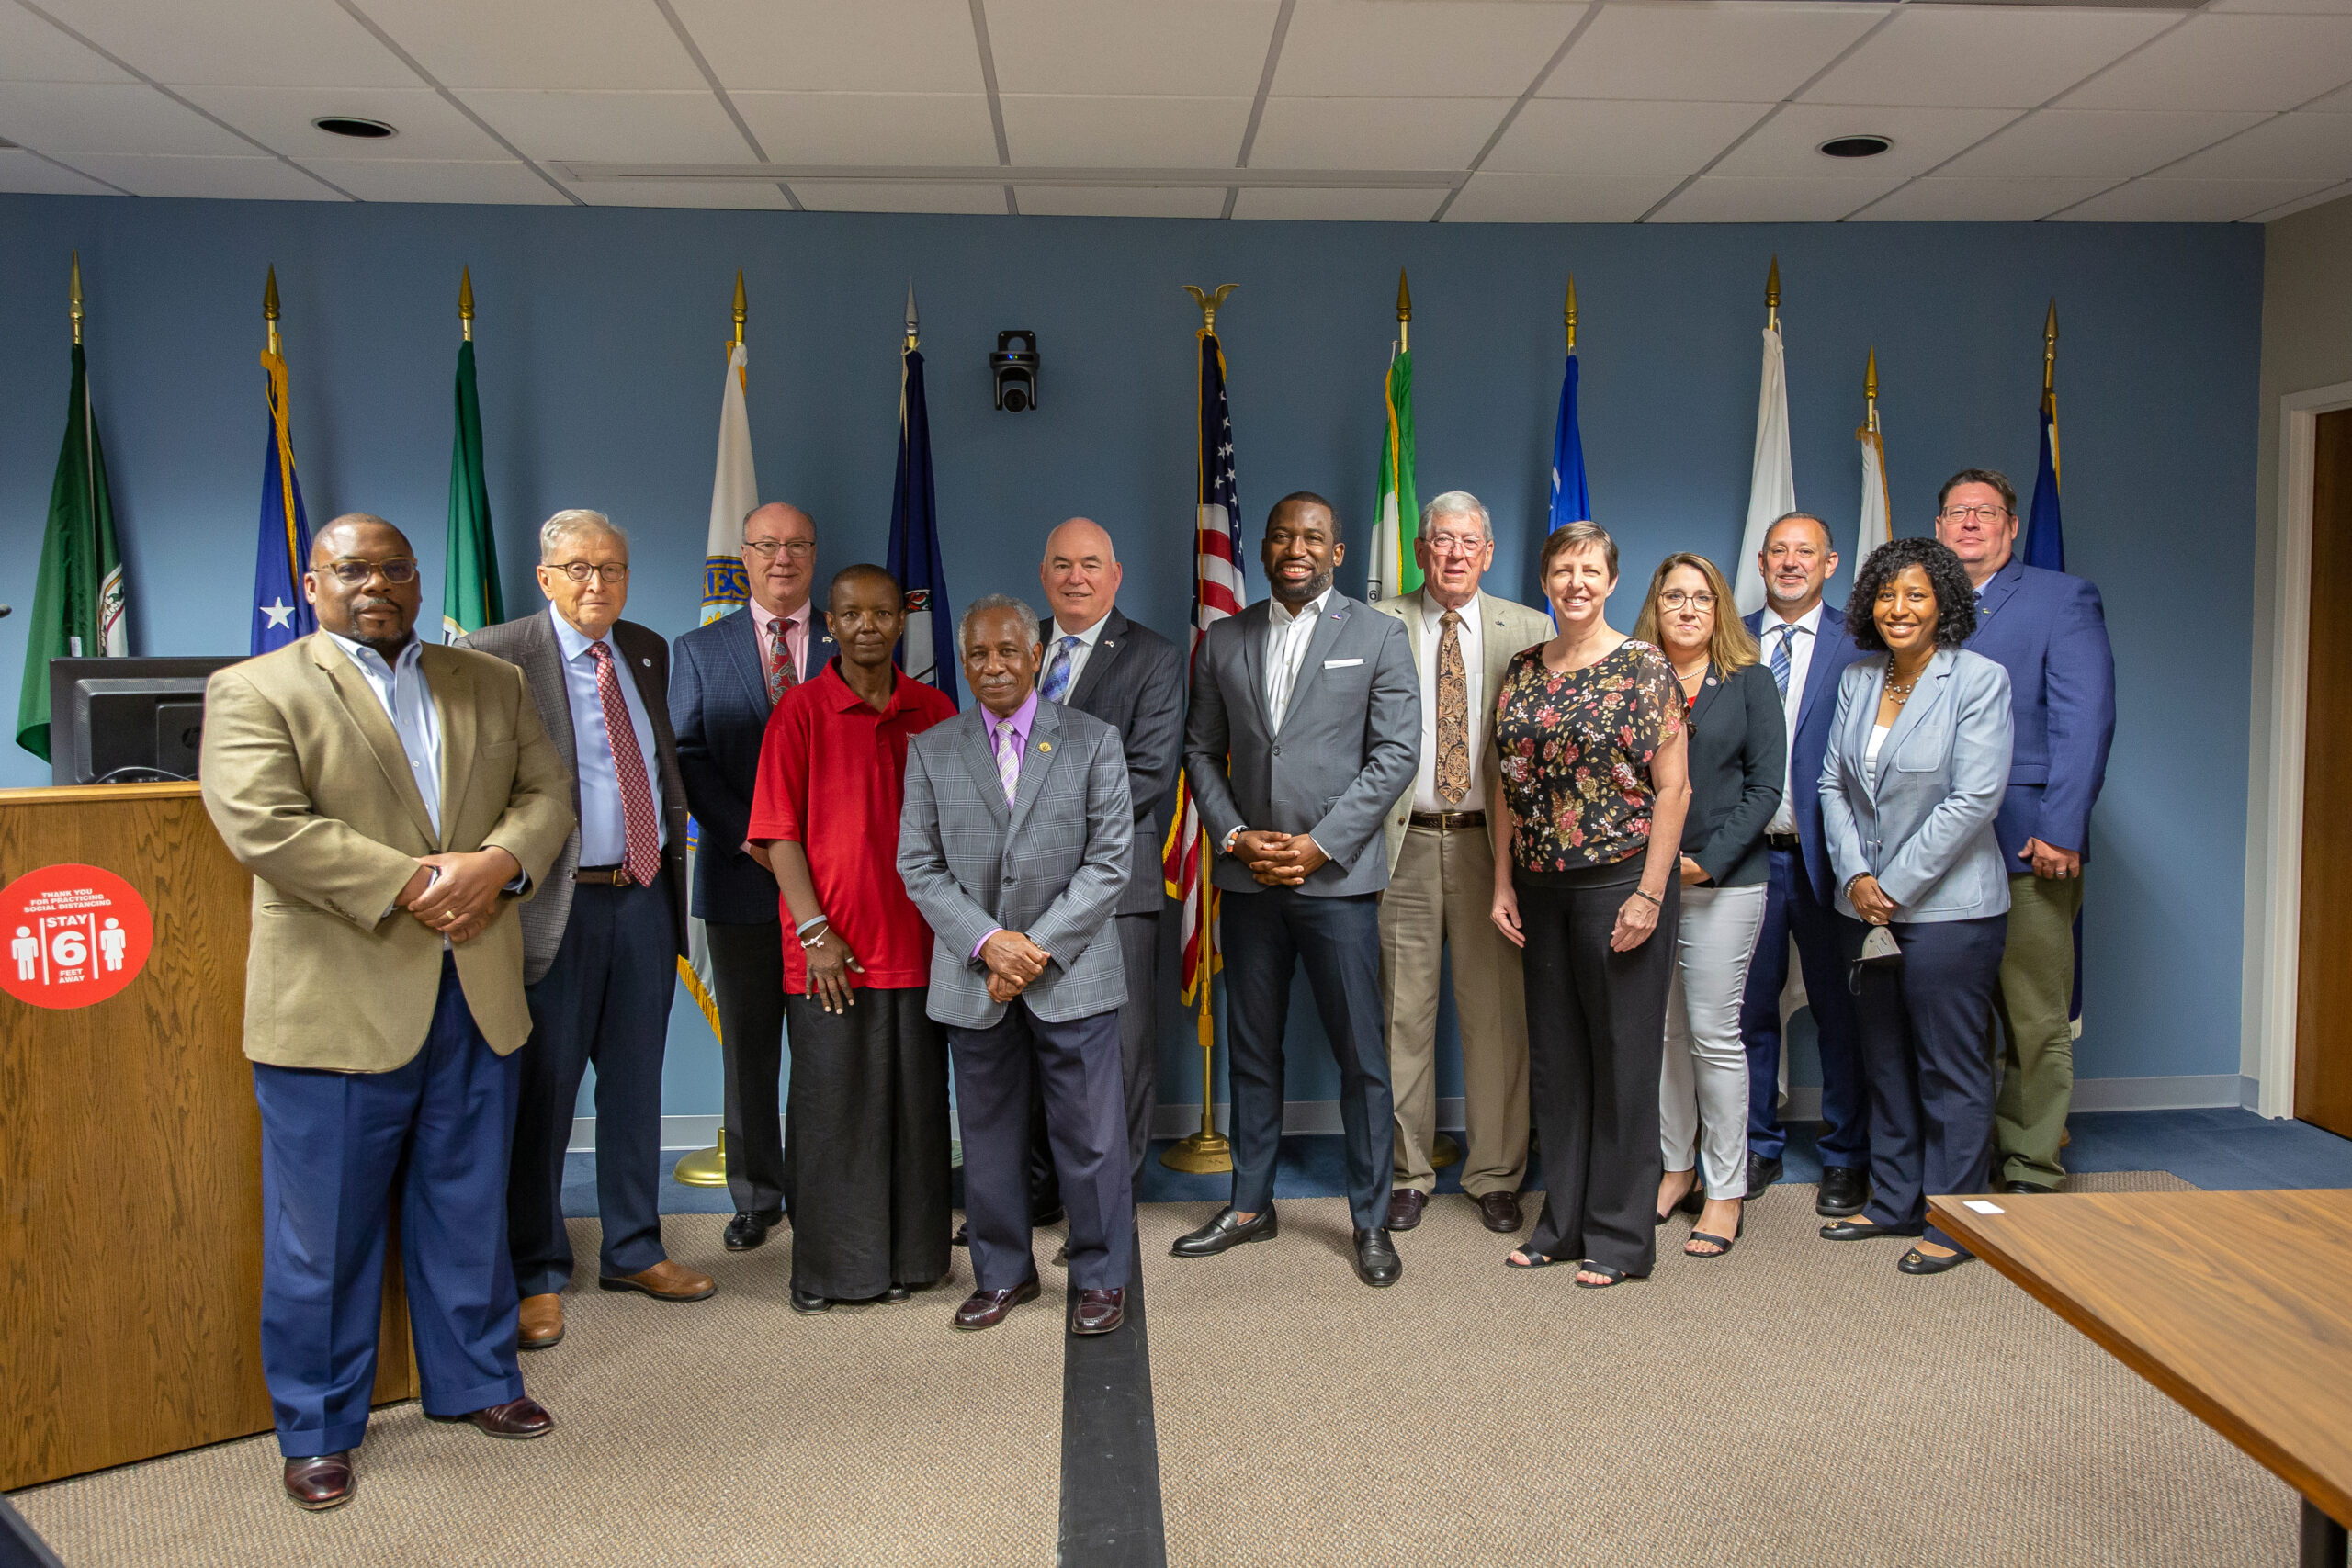 CVTA FY23 board members pictured from left to right: Perry J. Miller, John H. Hodges, Michael W. Byerly, Patricia A. Paige, Frank J. Thornton, Kevin P. Carroll, Mayor Levar Stoney, W. Canova Peterson, IV, Julie E. Timm, Jennifer B. DeBruhl, R. Shane Mann, Joi Taylor Dean, Neil Spoonhower